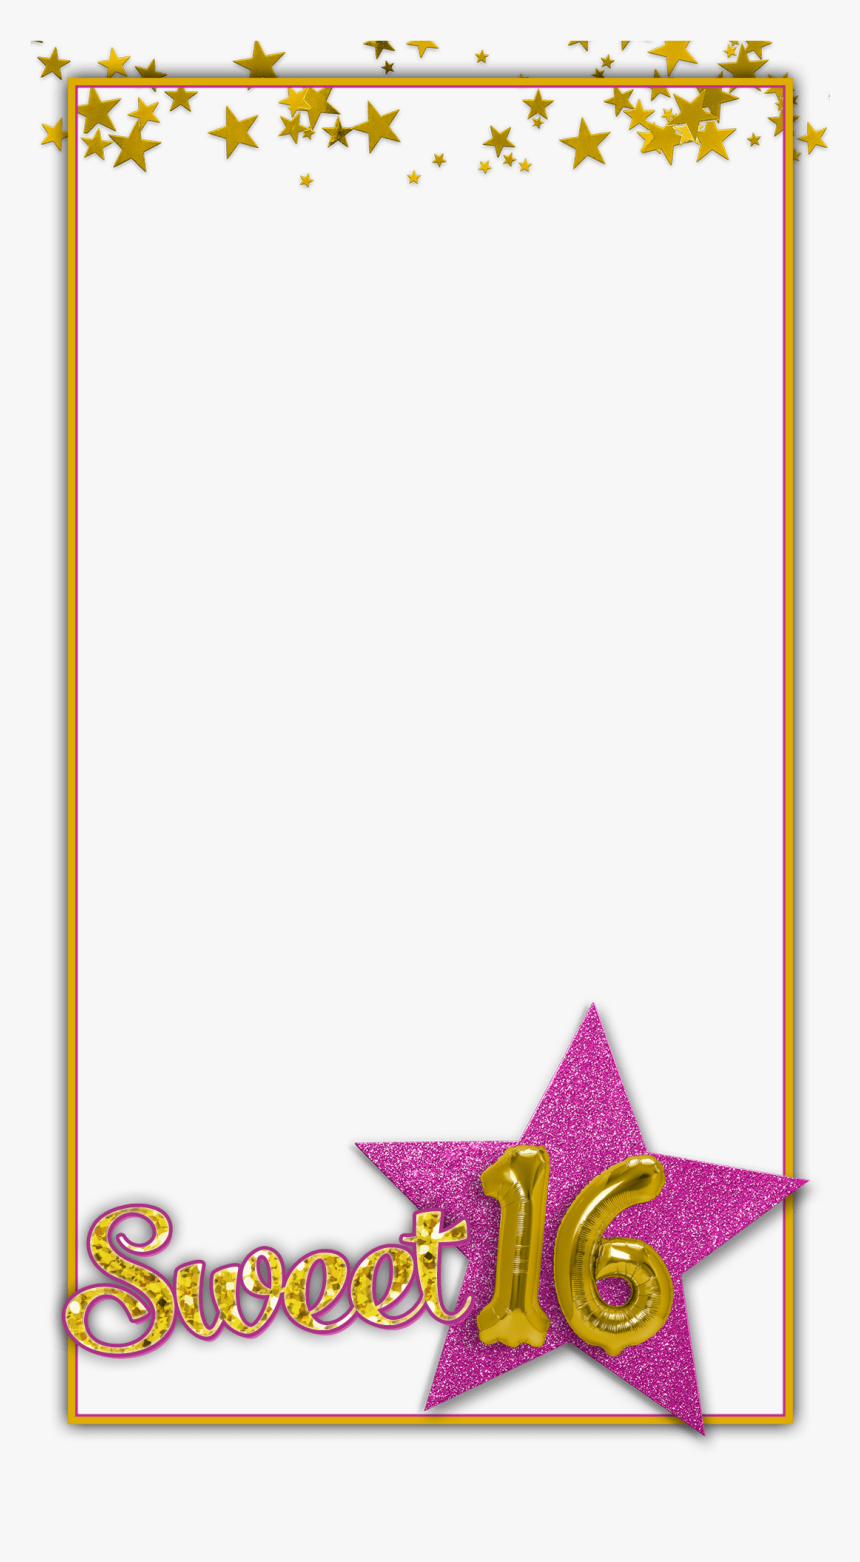 Free Sweet Snapchat Geofilter - Sweet 16 Transparent, HD Png Download, Free Download